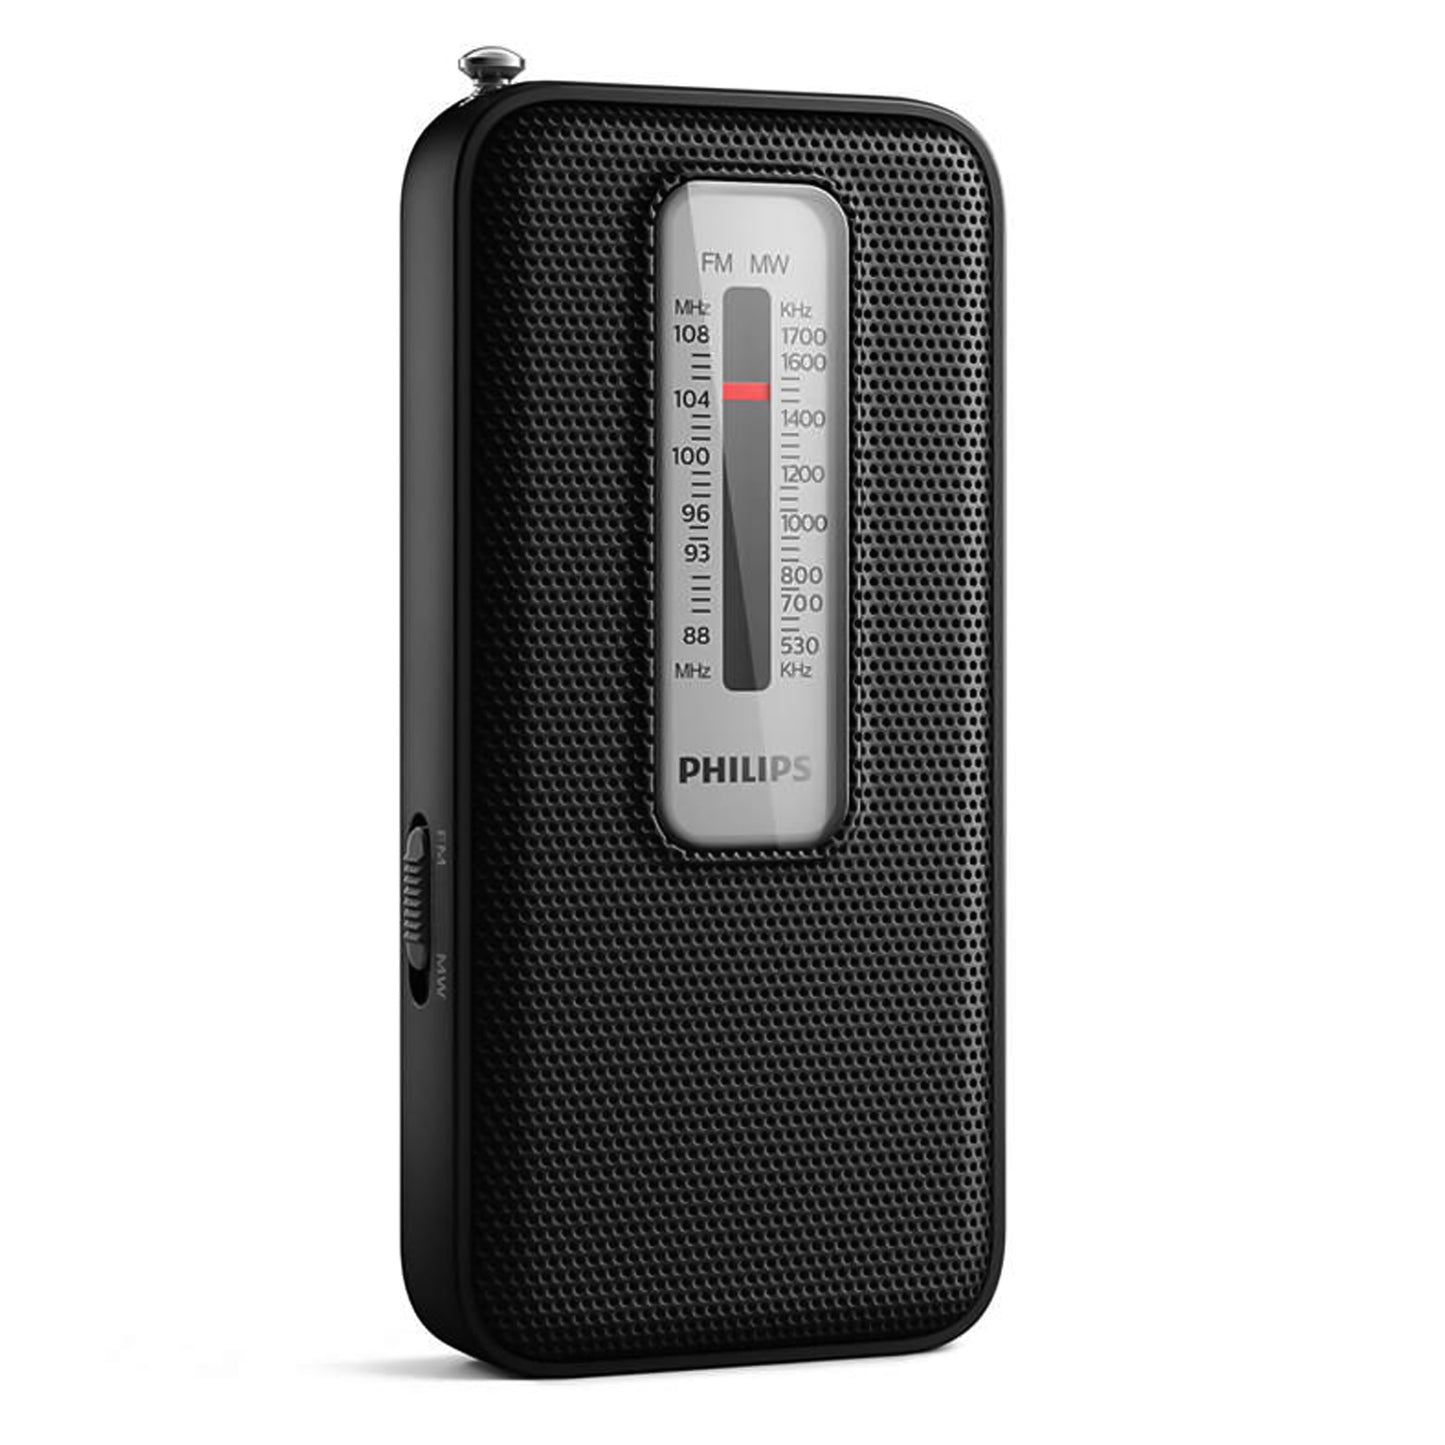 Philips Pocket Classic Portable and pocket-sized FM MW radio with retractable antenna, integrated mono speaker, 3.5mm jack headphone input